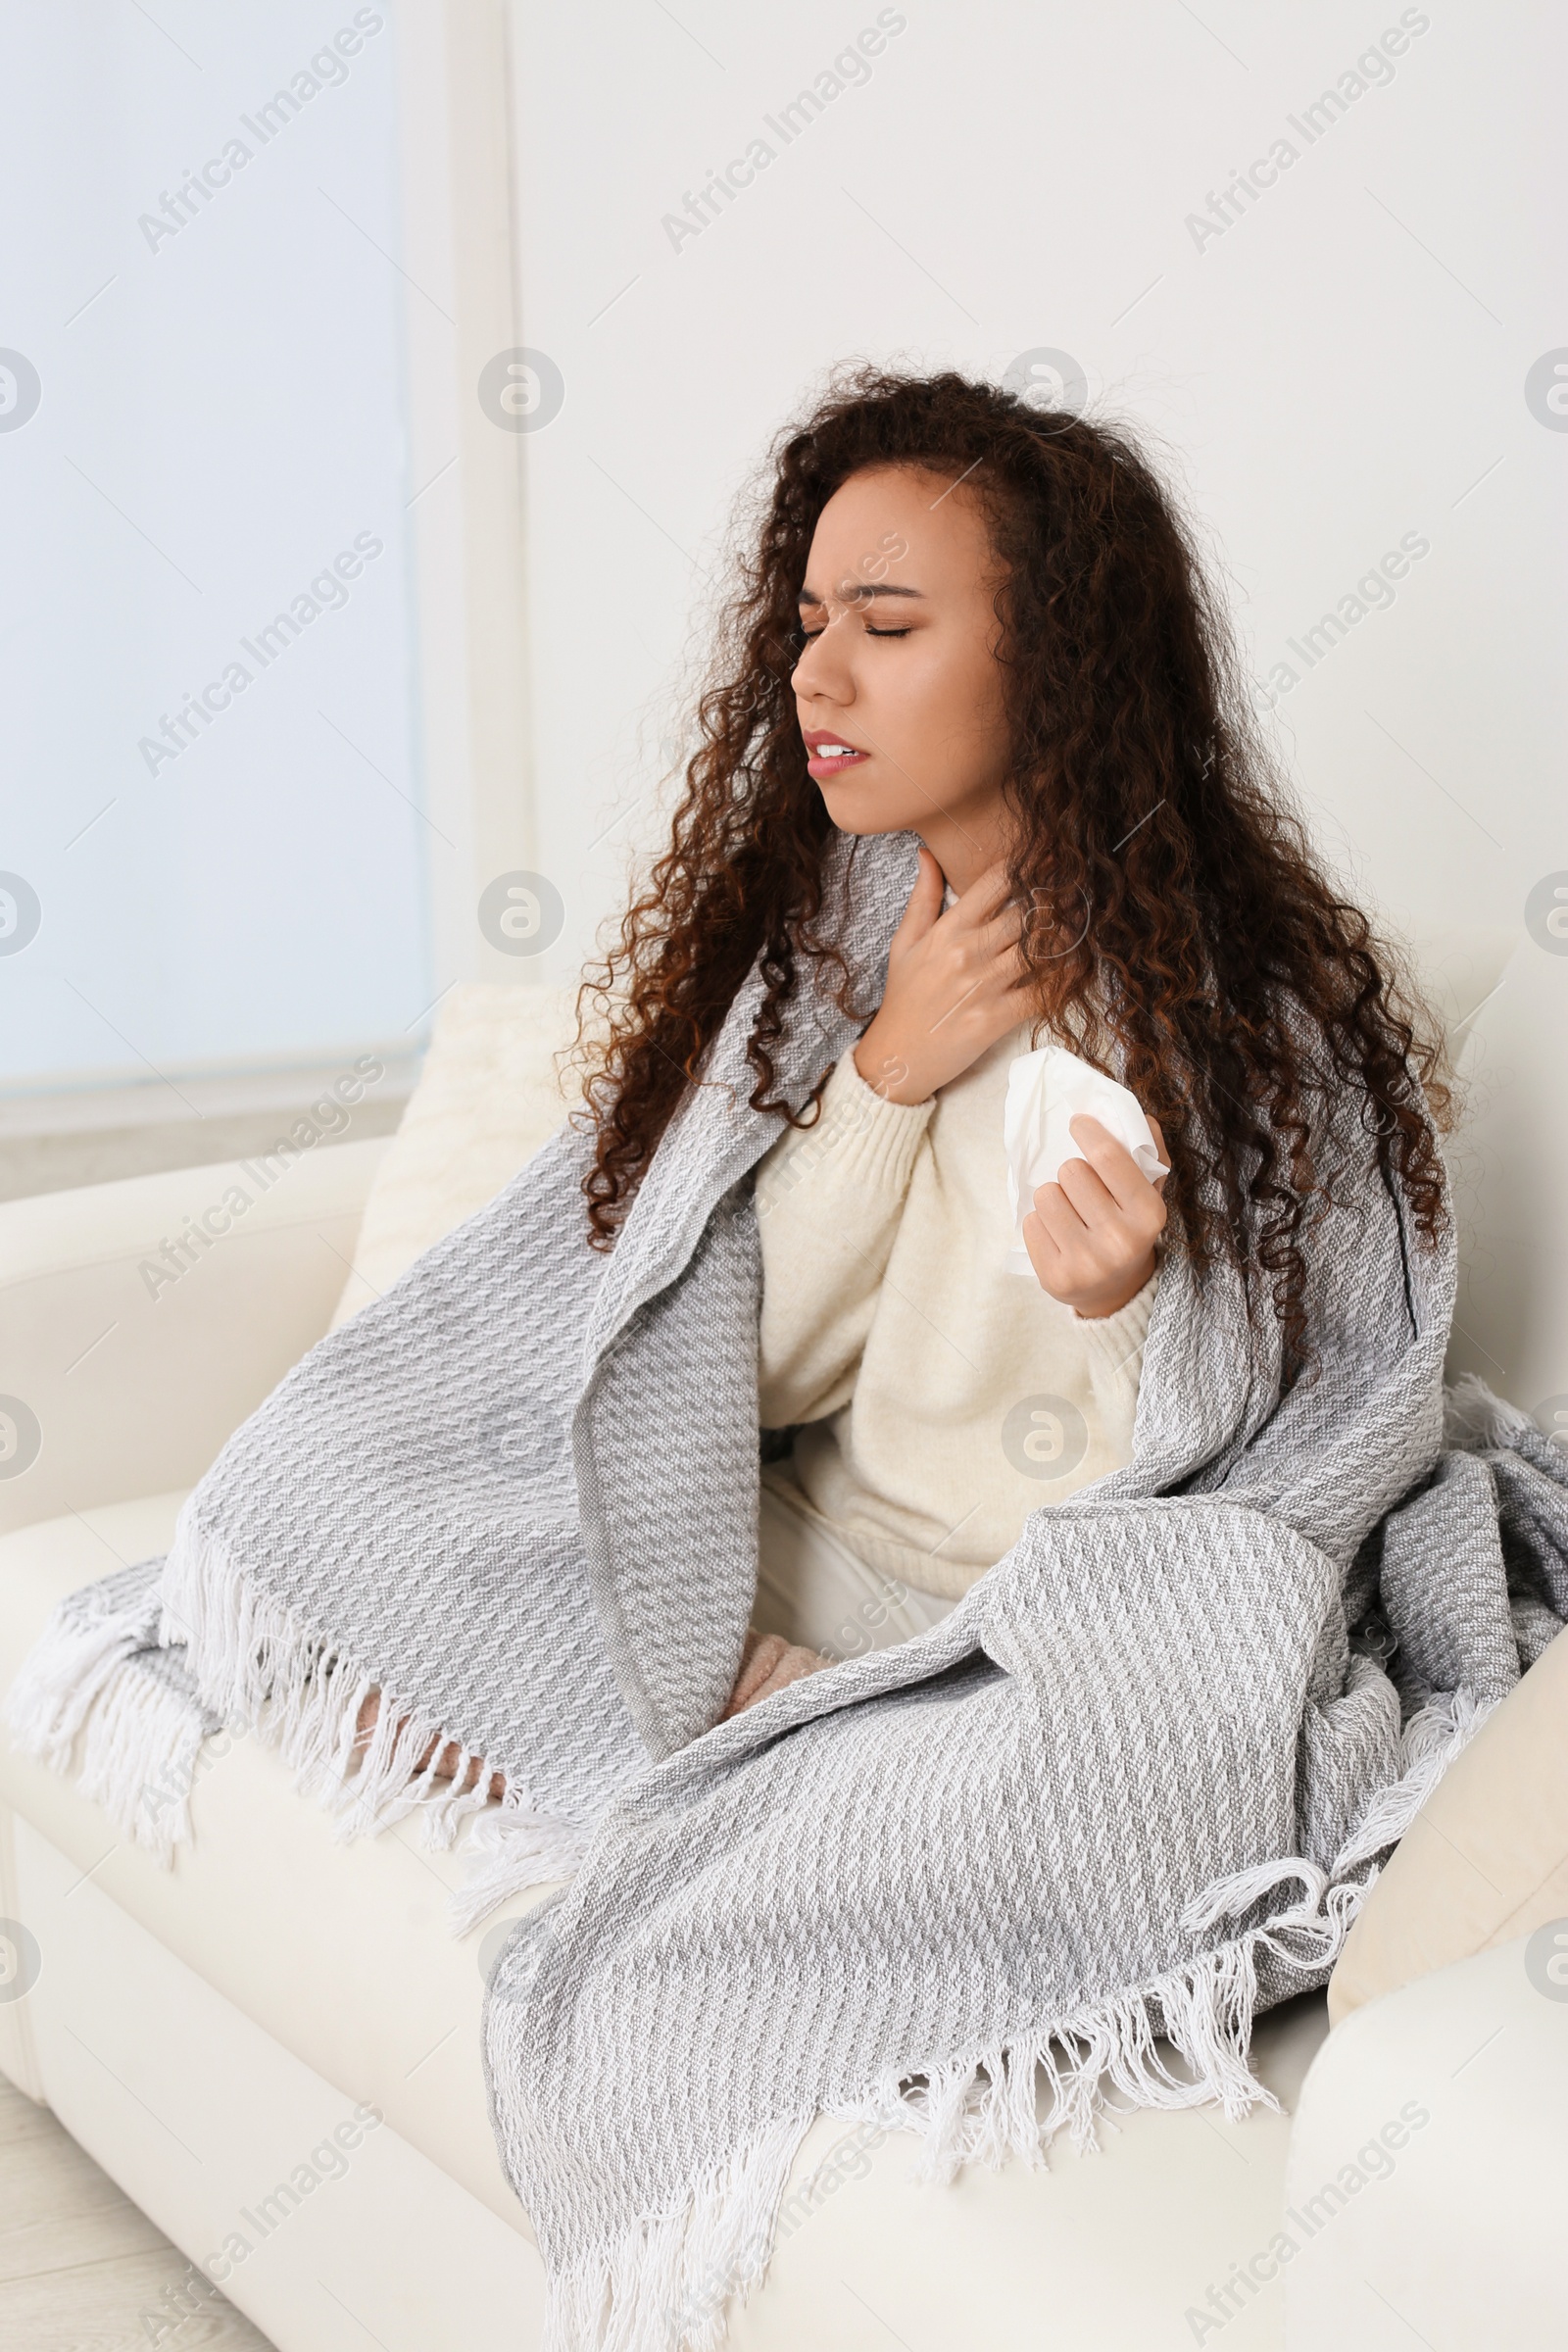 Photo of Sick African American woman with tissue at home